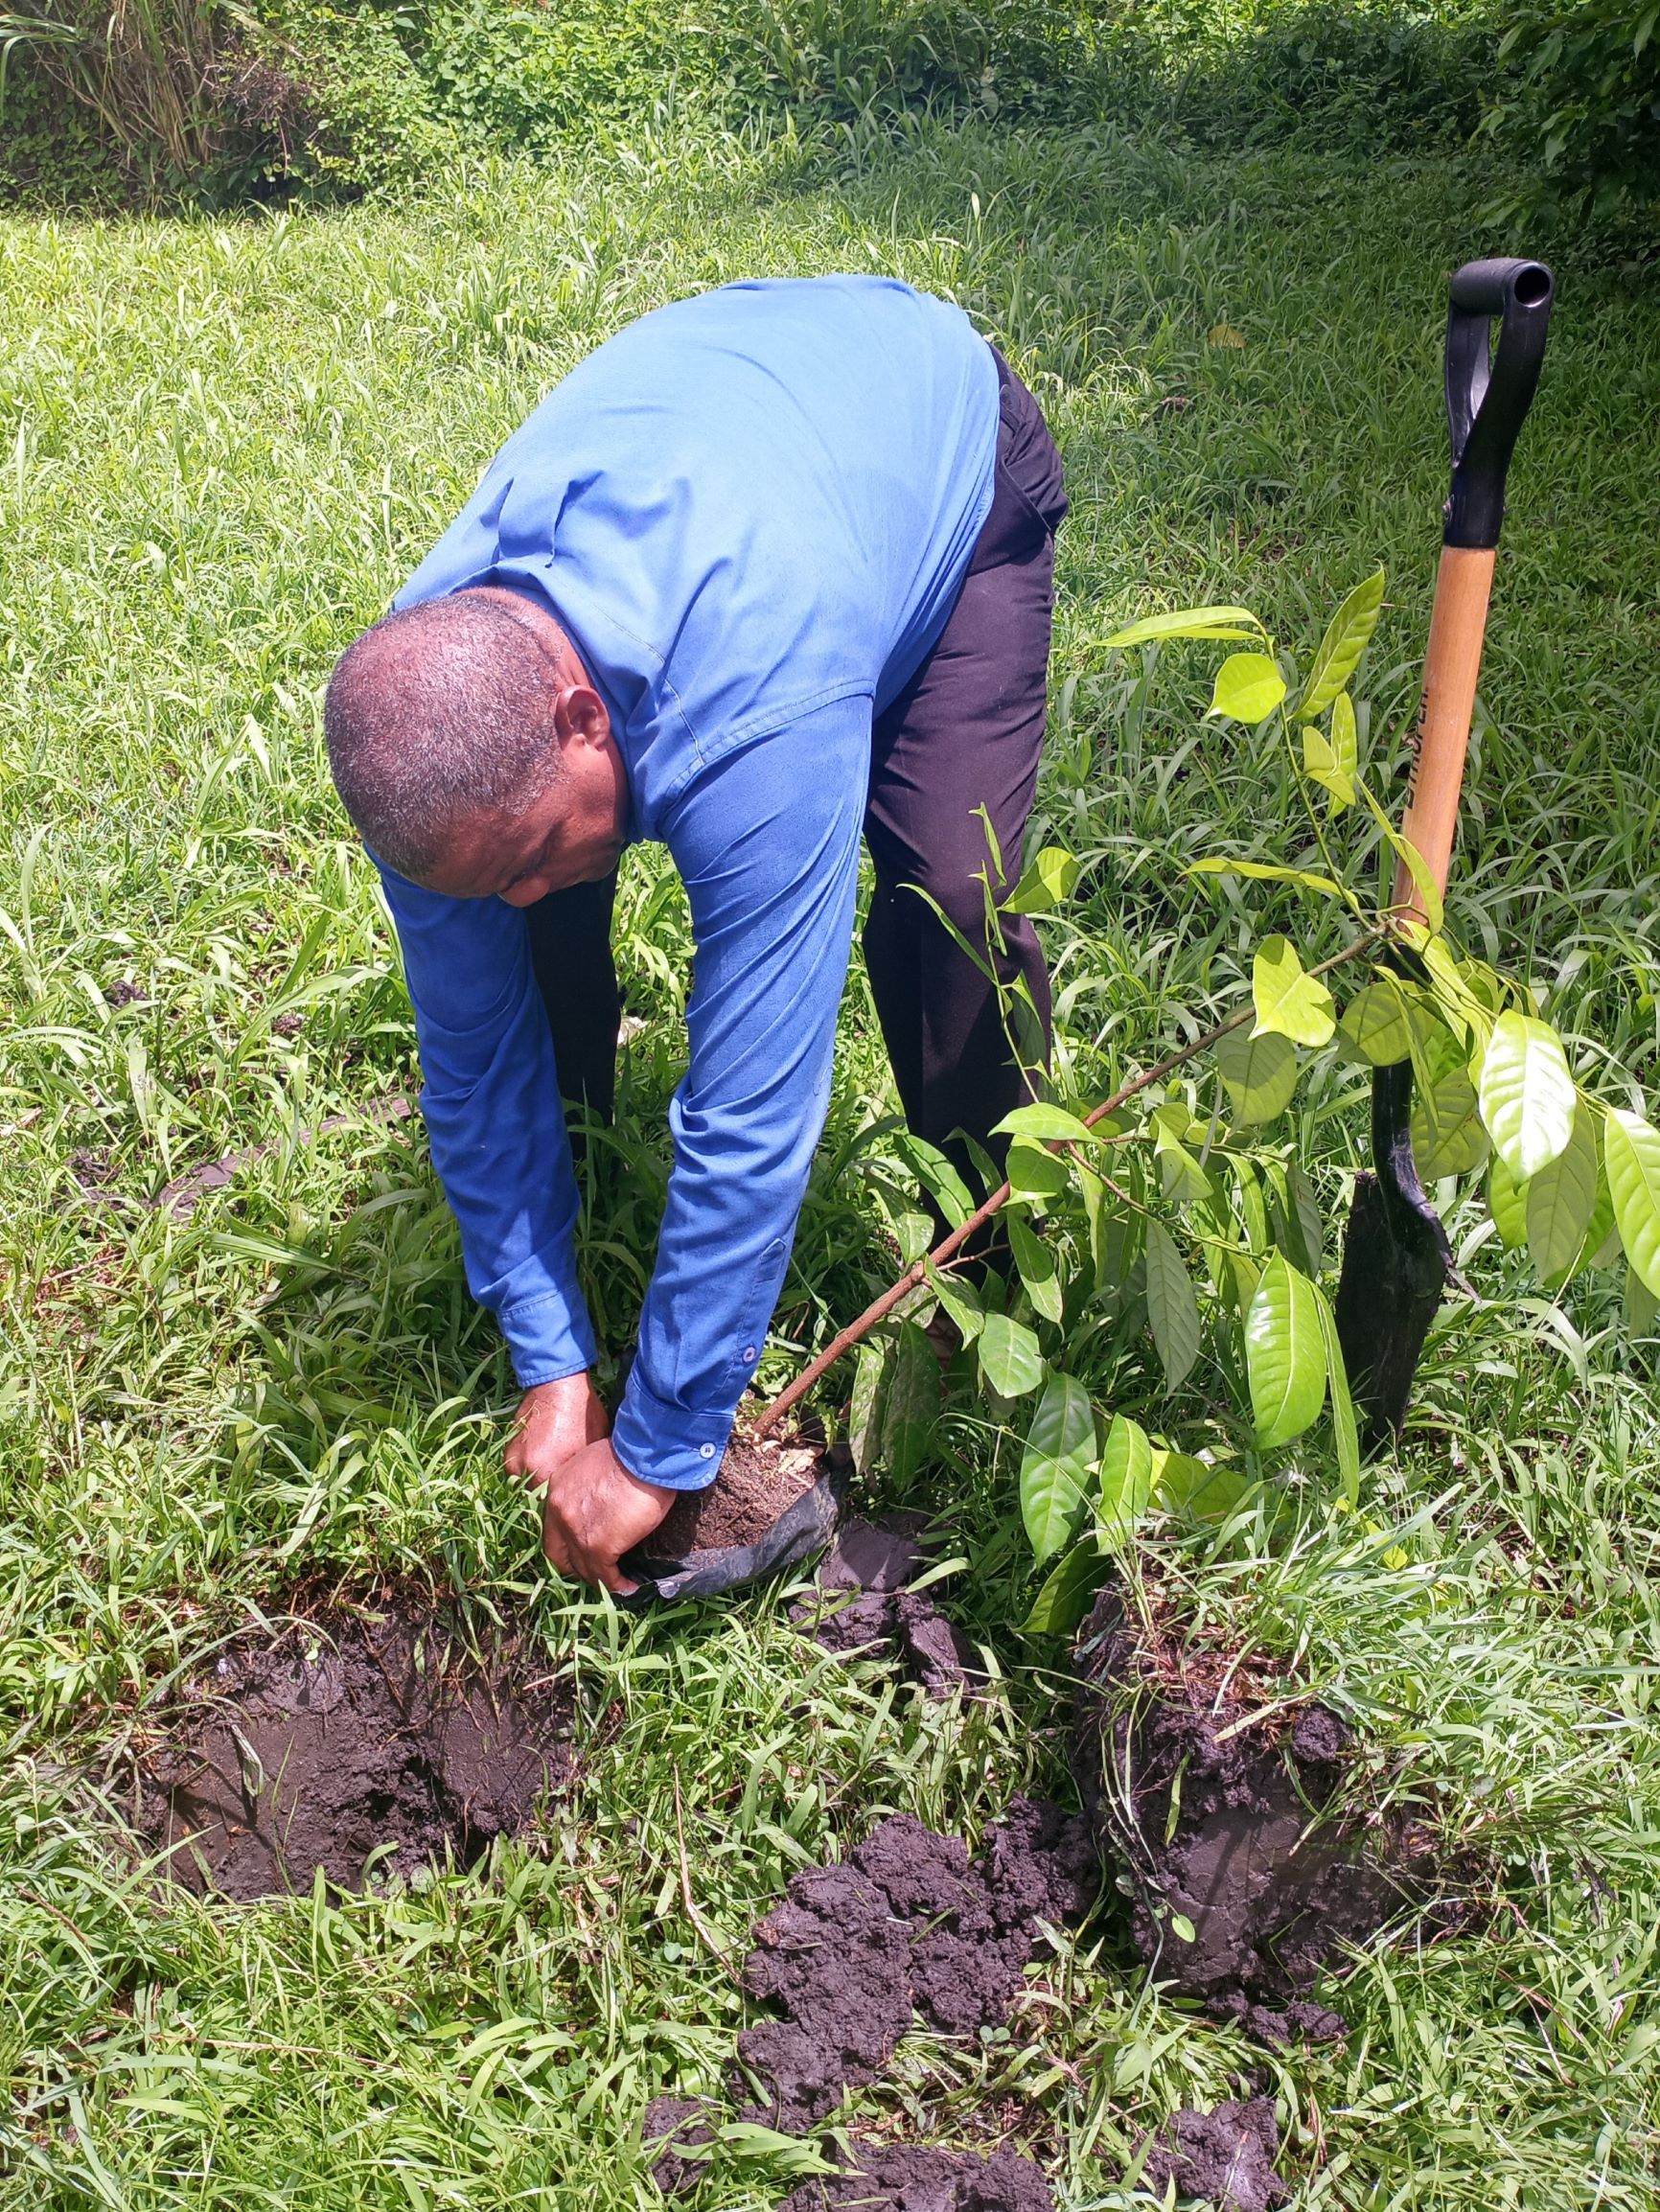 Tree Planting Activity at South St. George Gov’t School in Observance of International Day of Co-operatives 2021